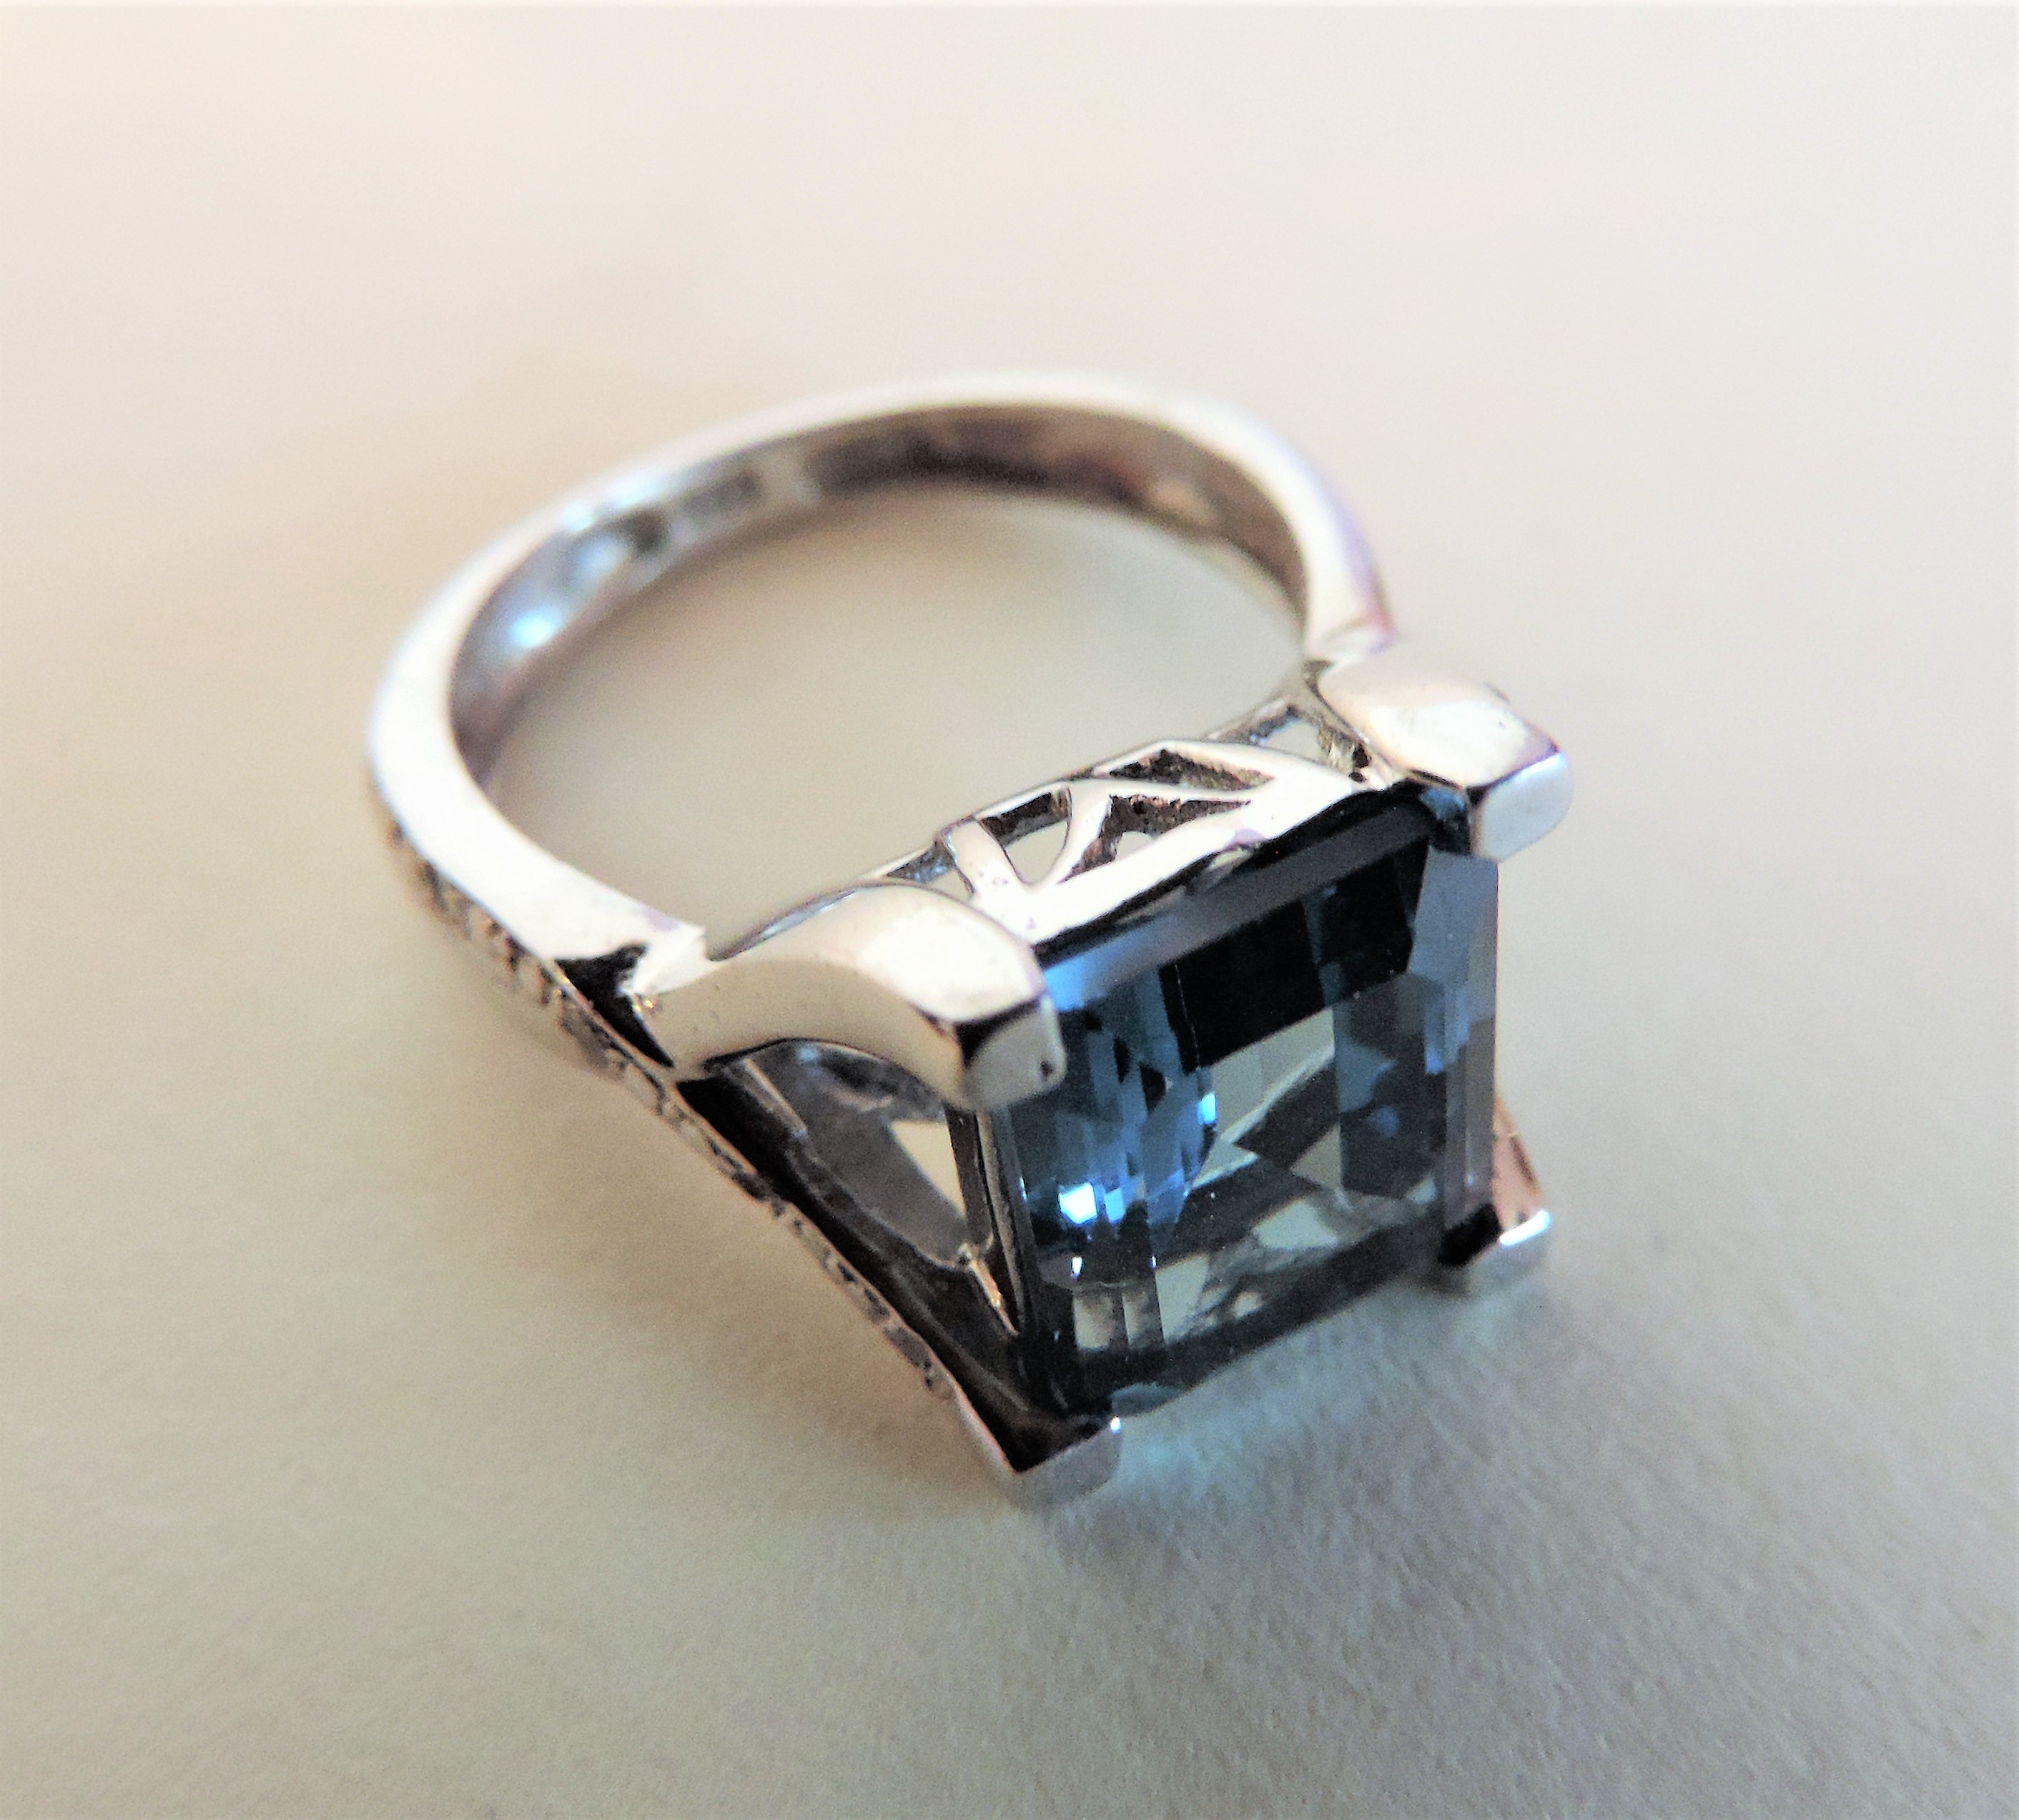 Blue Topaz Emerald Cut Ring 4carat in Sterling Silver - Image 4 of 4